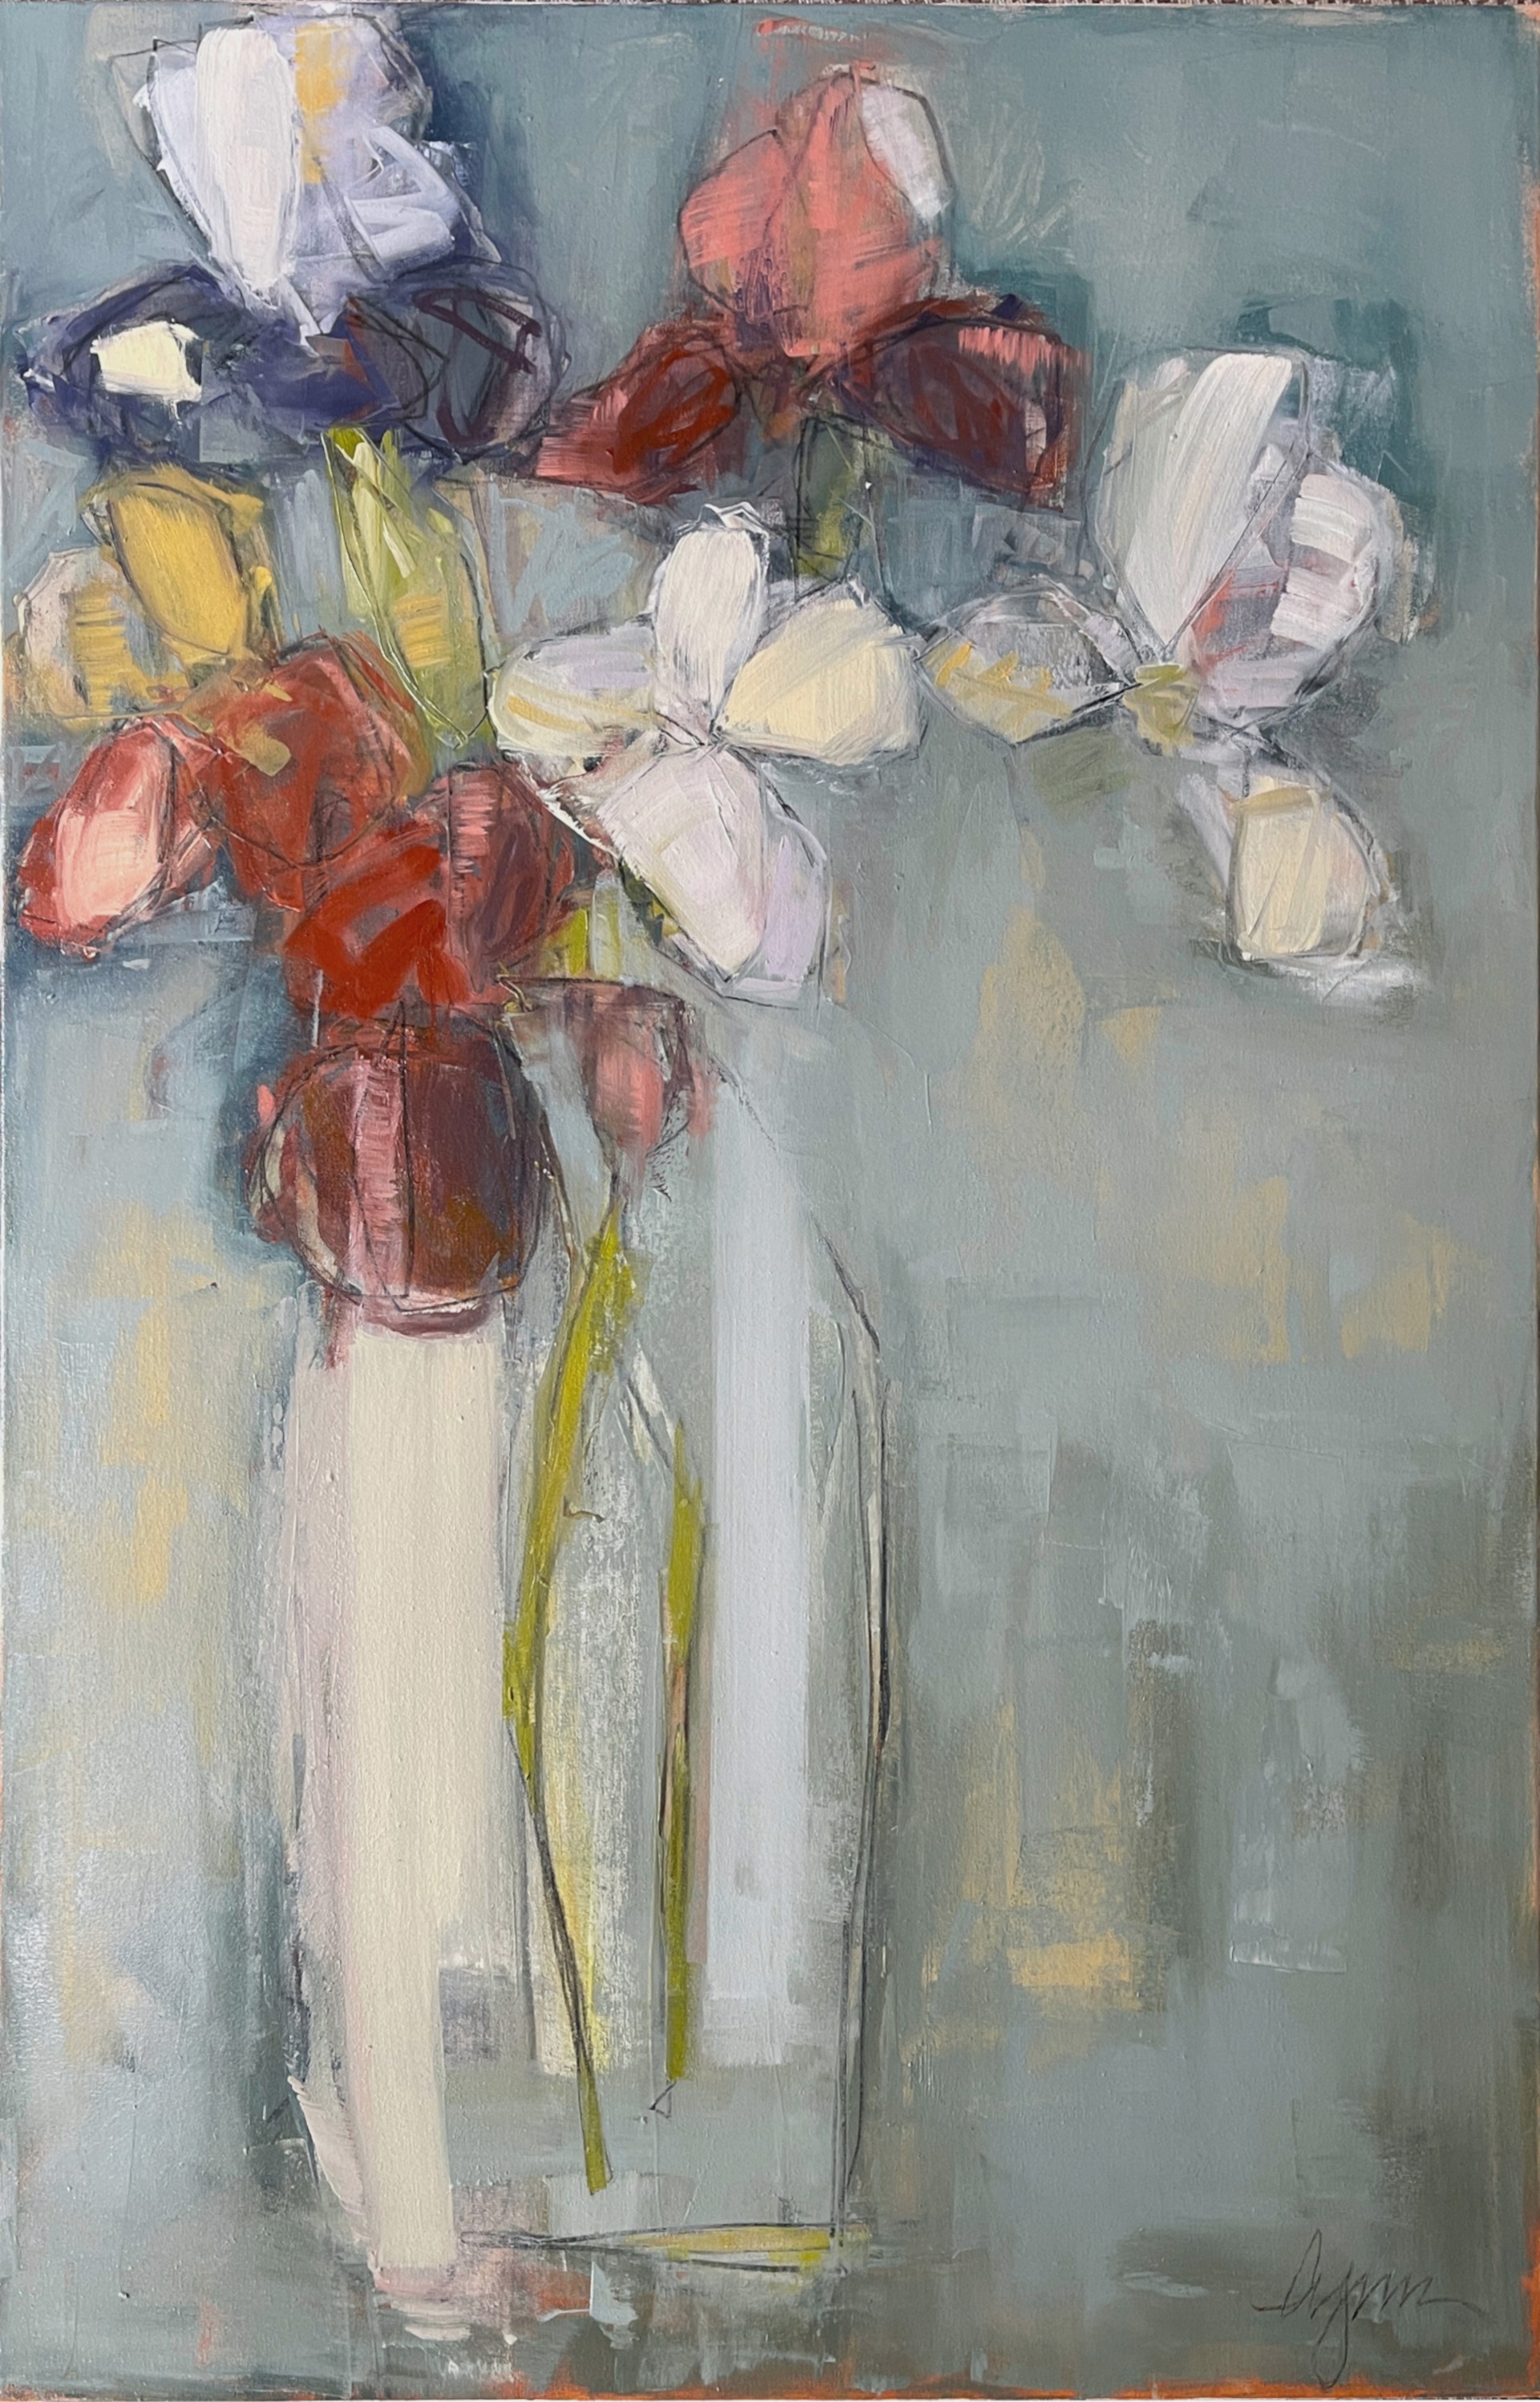 Ruby by Atlanta artist Lynn Johnson is a 60"H x 40"W abstract floral painting made of oil and graphite.